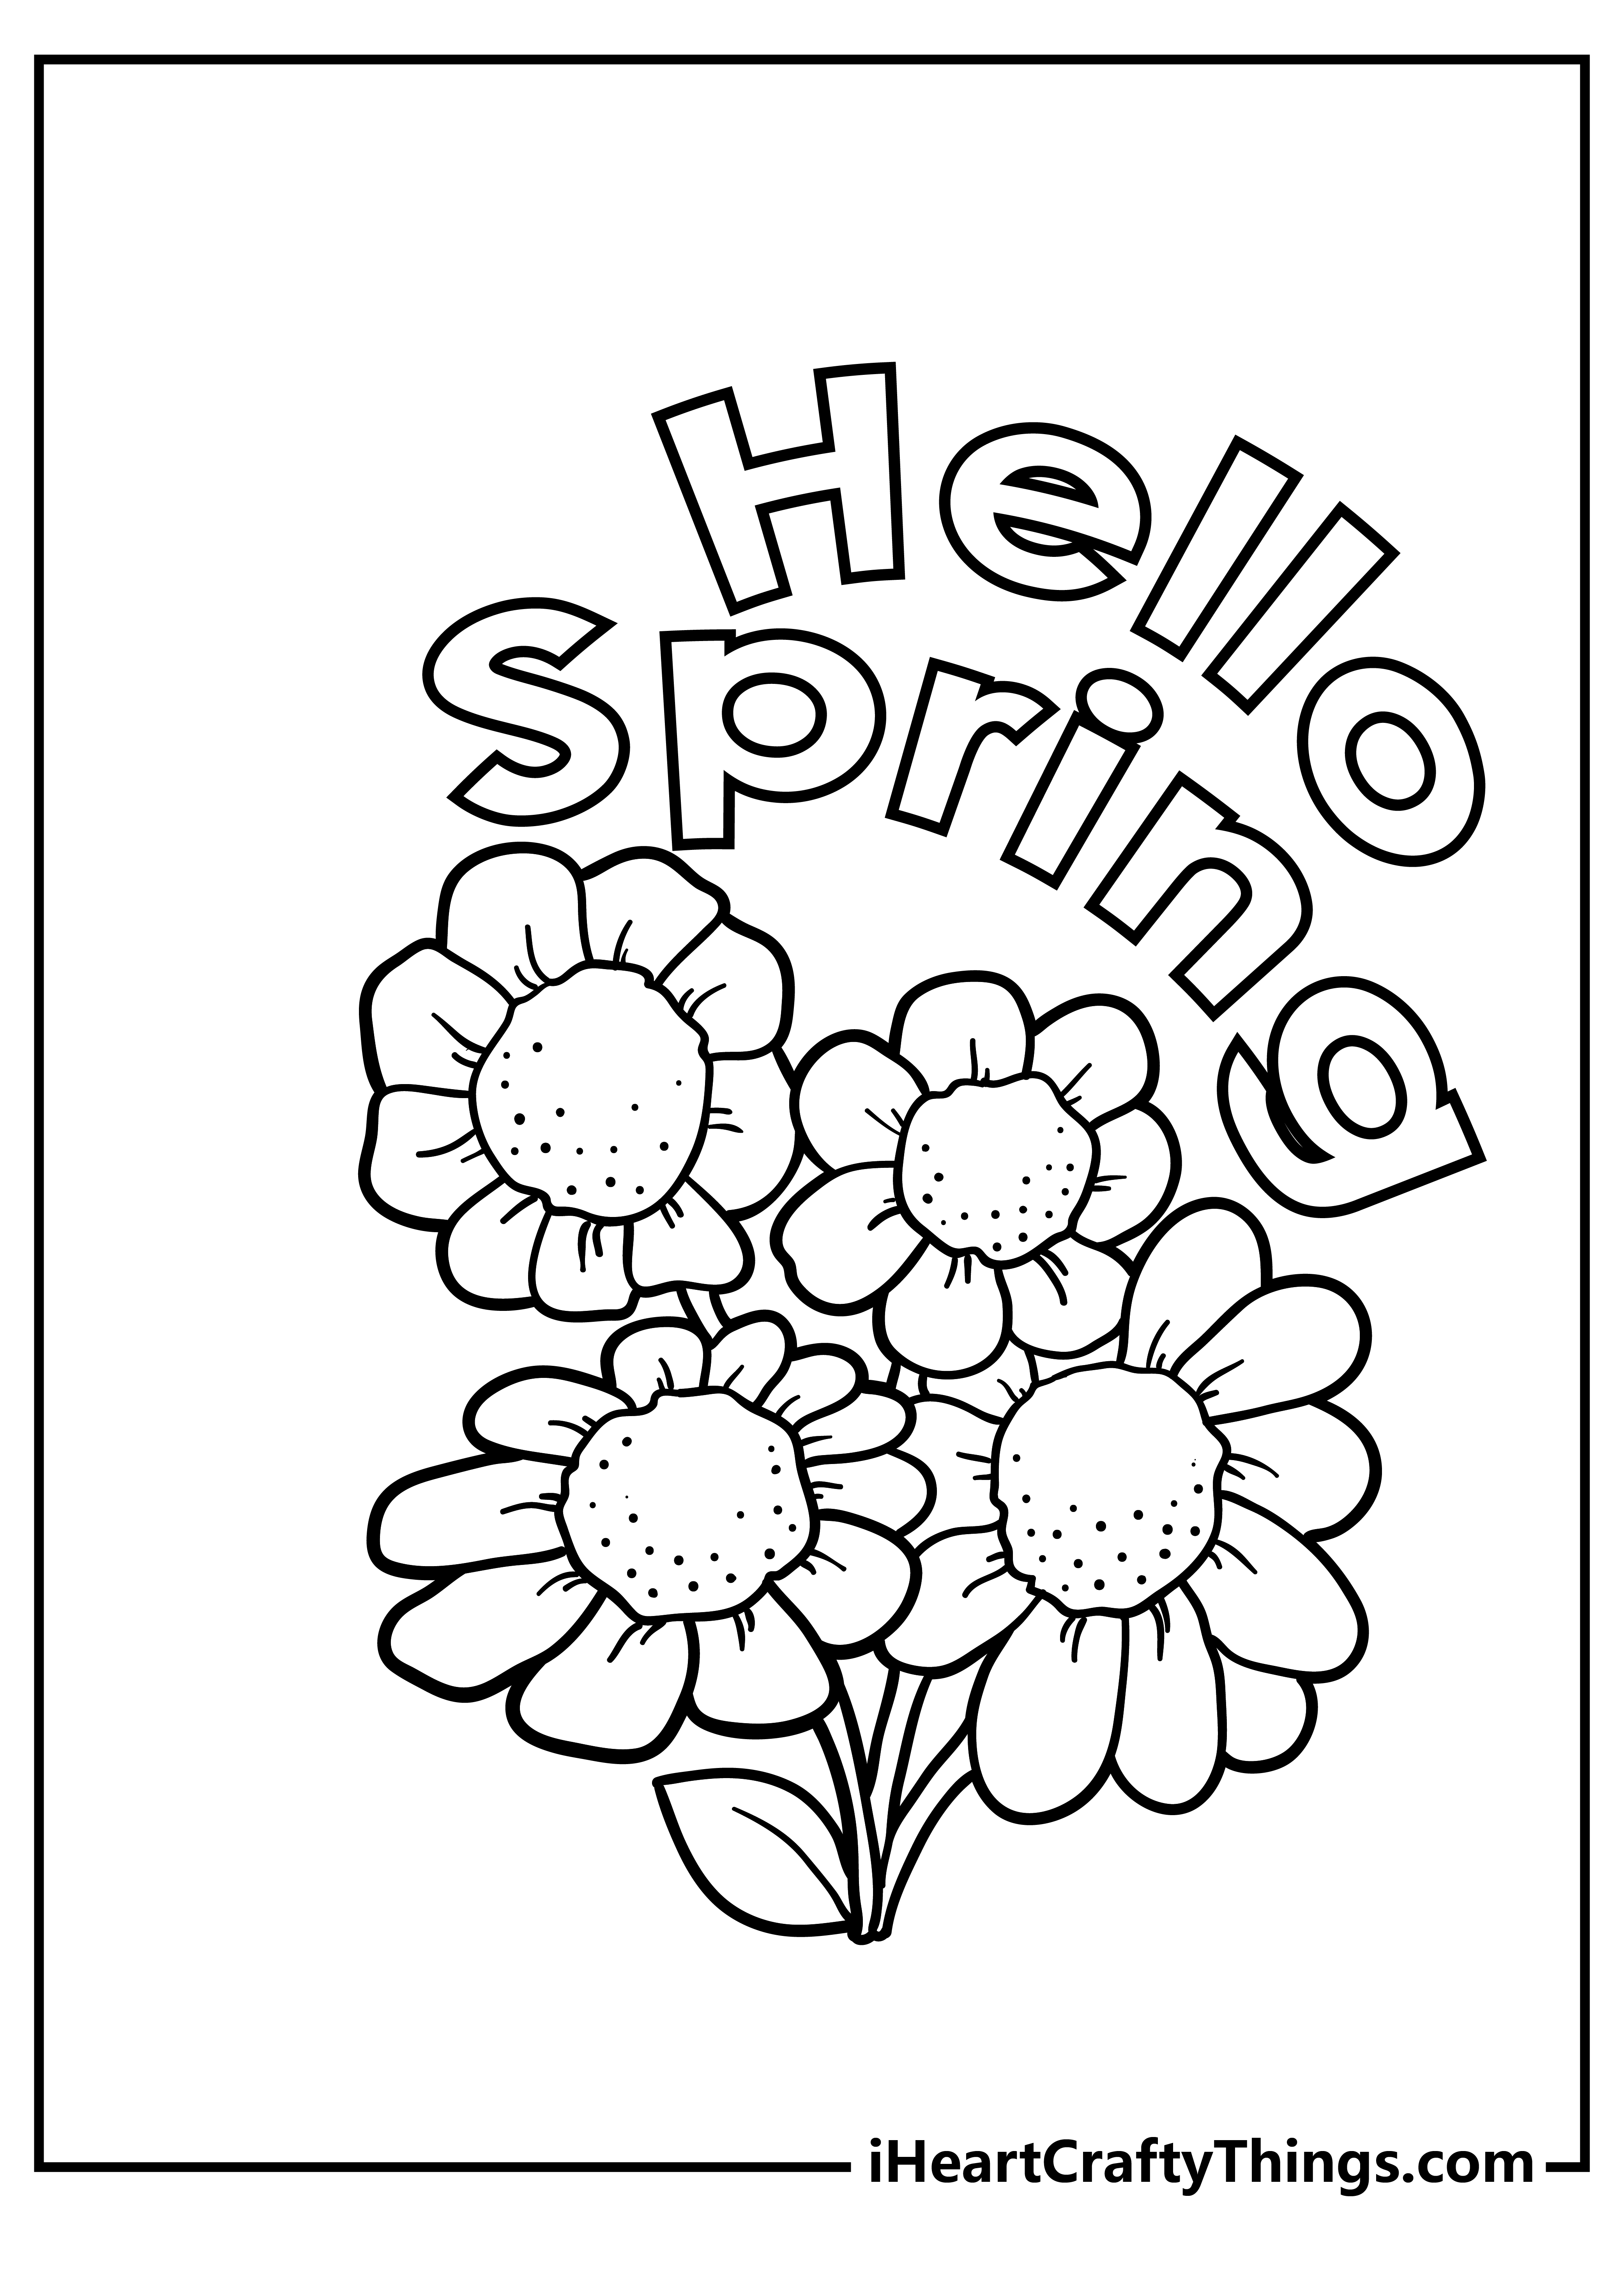 Spring Coloring Pages for kids free download